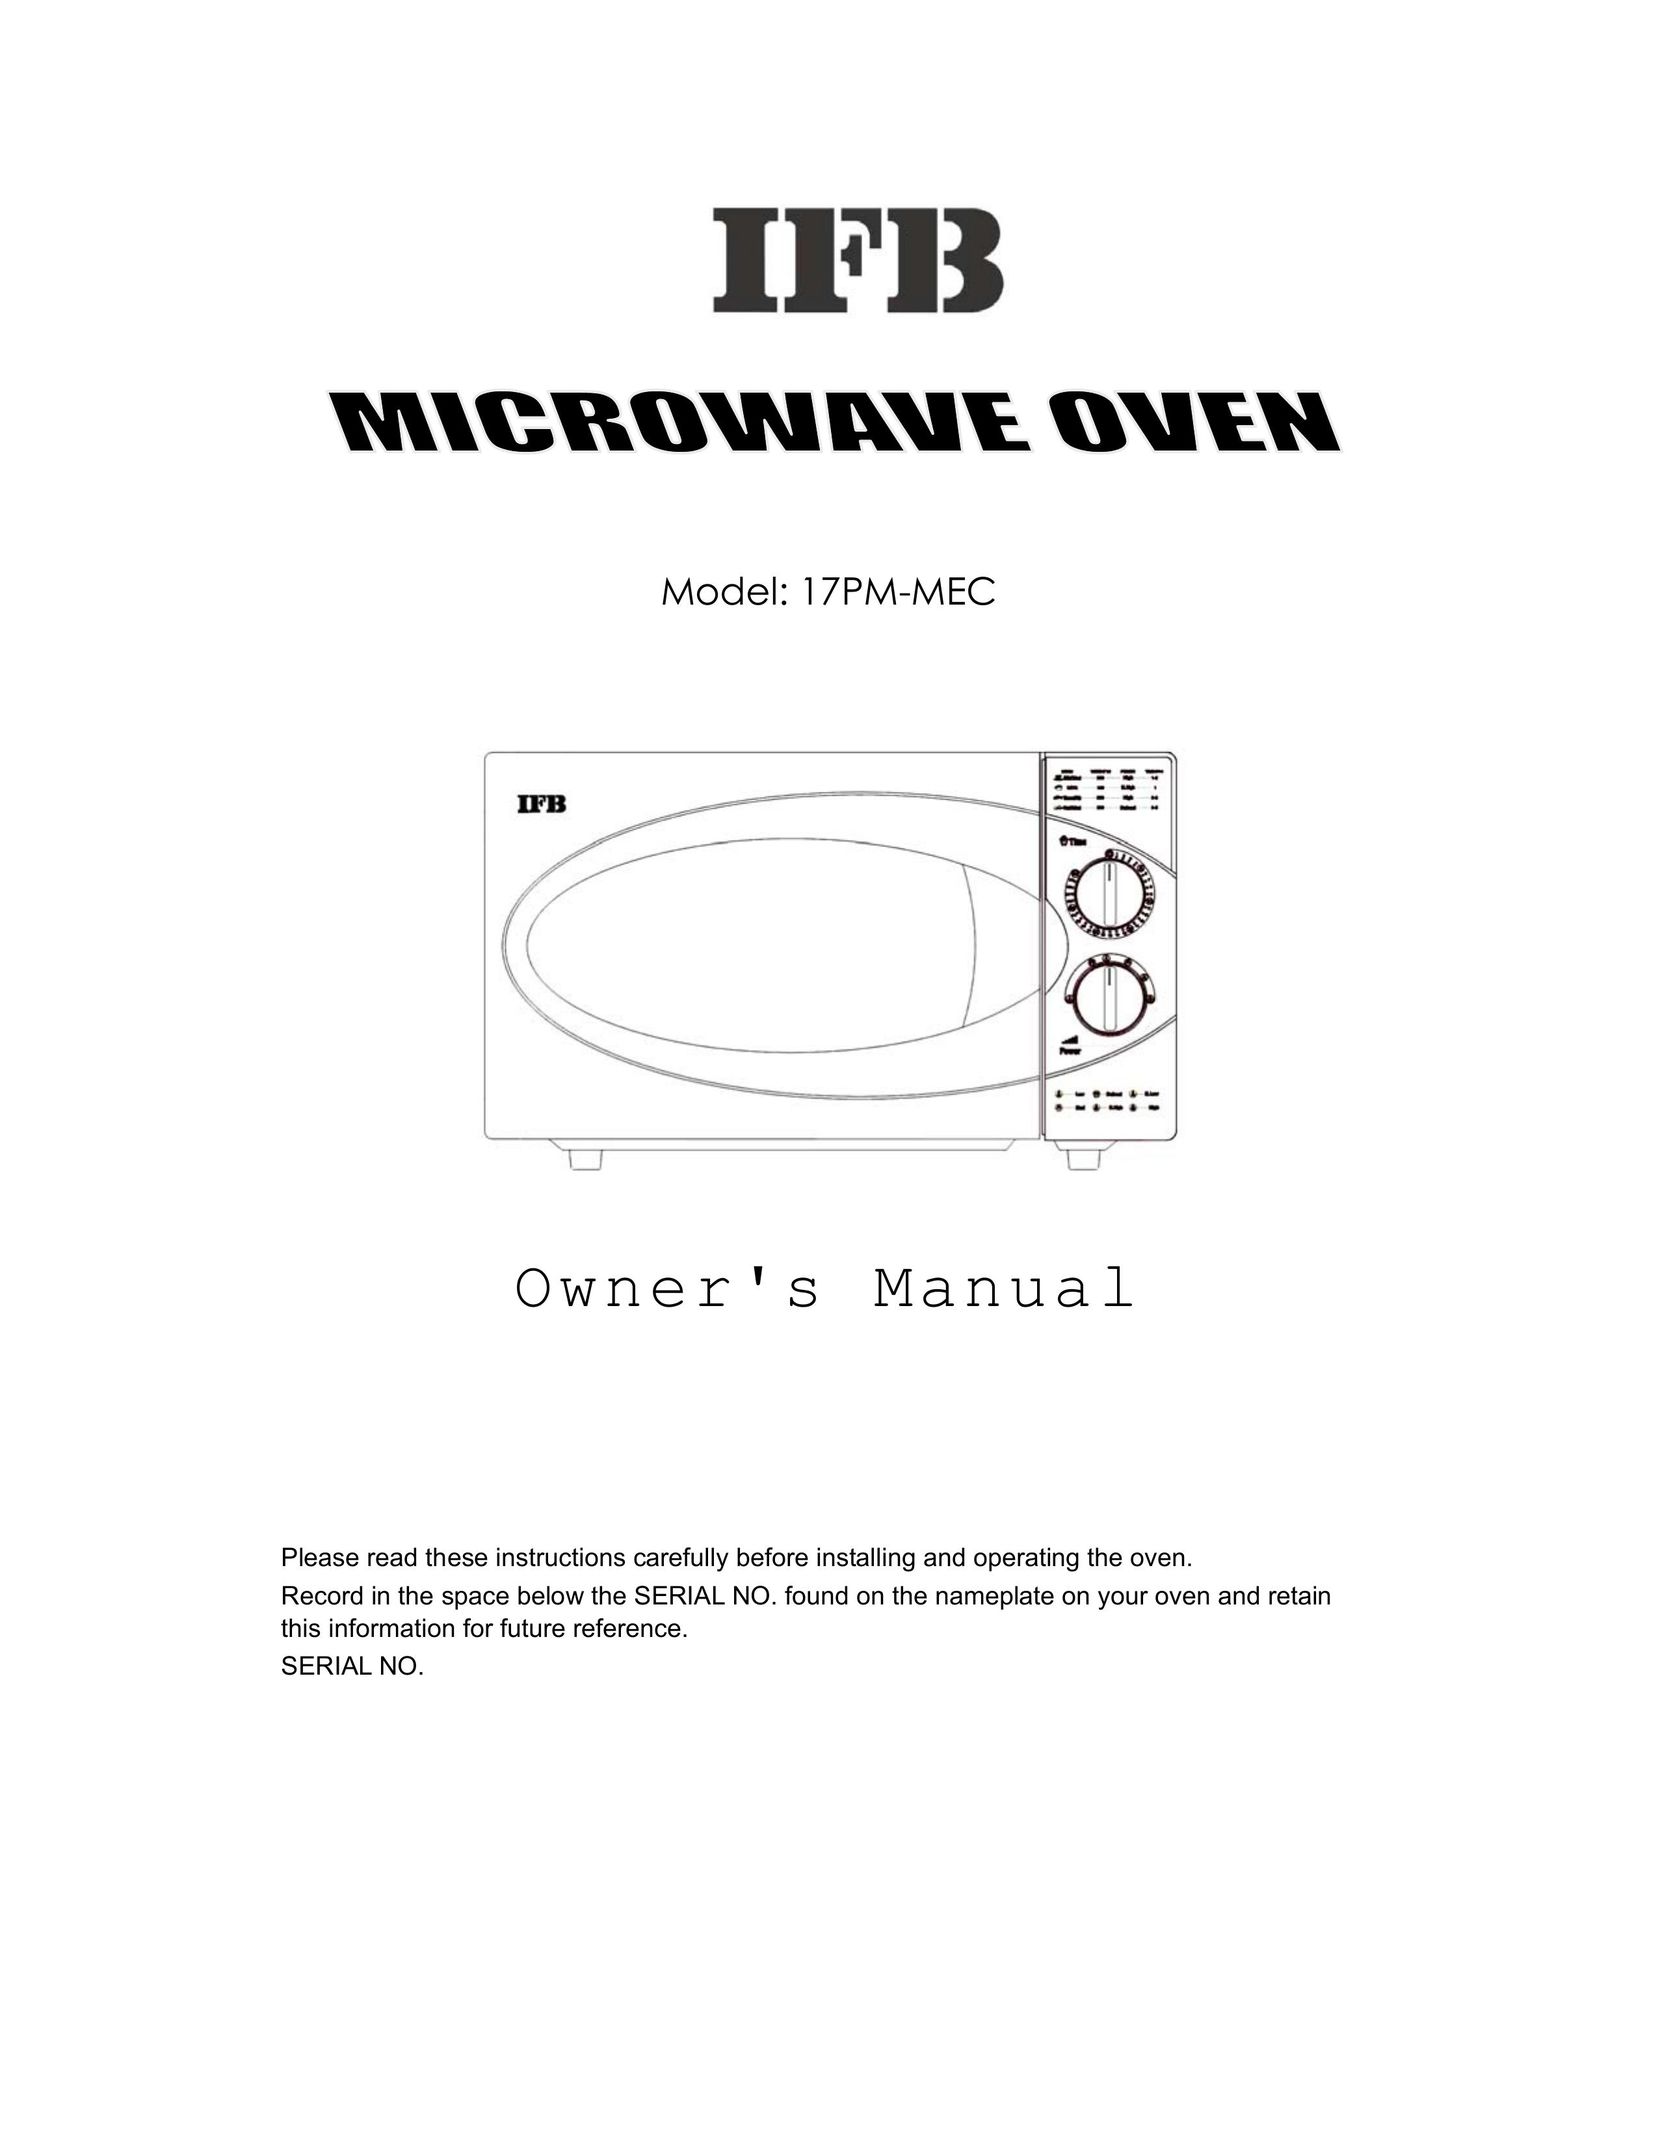 IFB Appliances 17PM-MEC Microwave Oven User Manual